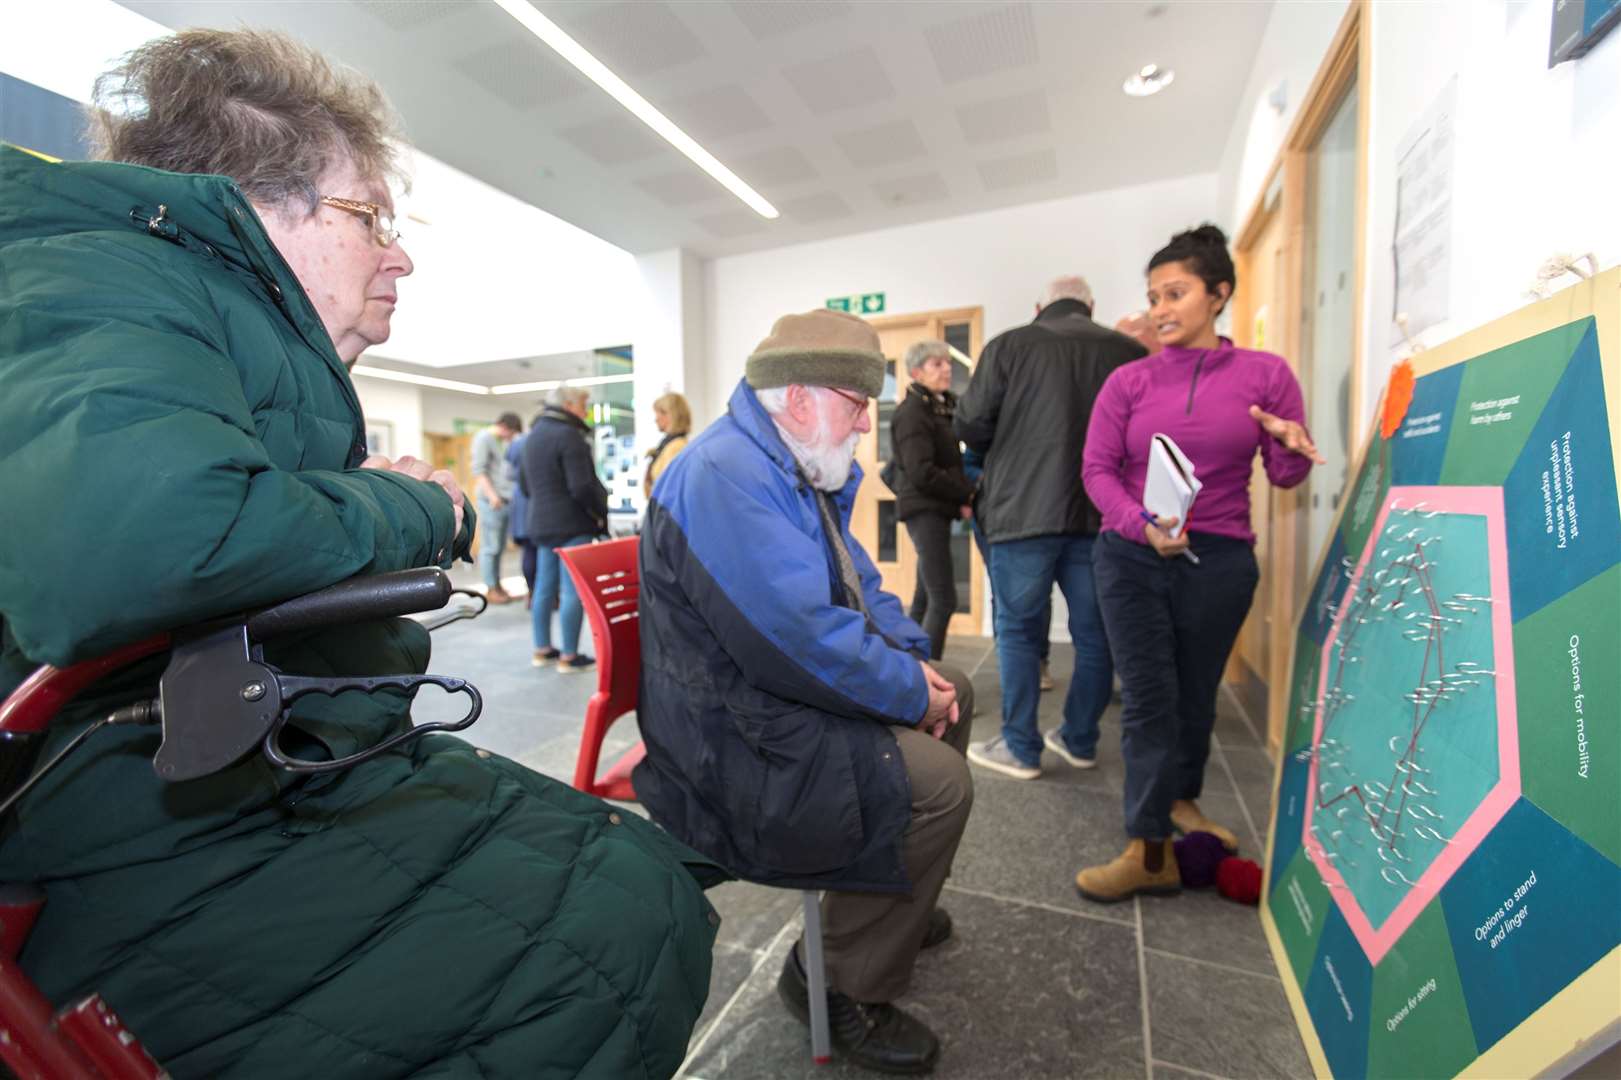 Members of the public sharing their opinions with the Sustrans team during a consultation event in October.